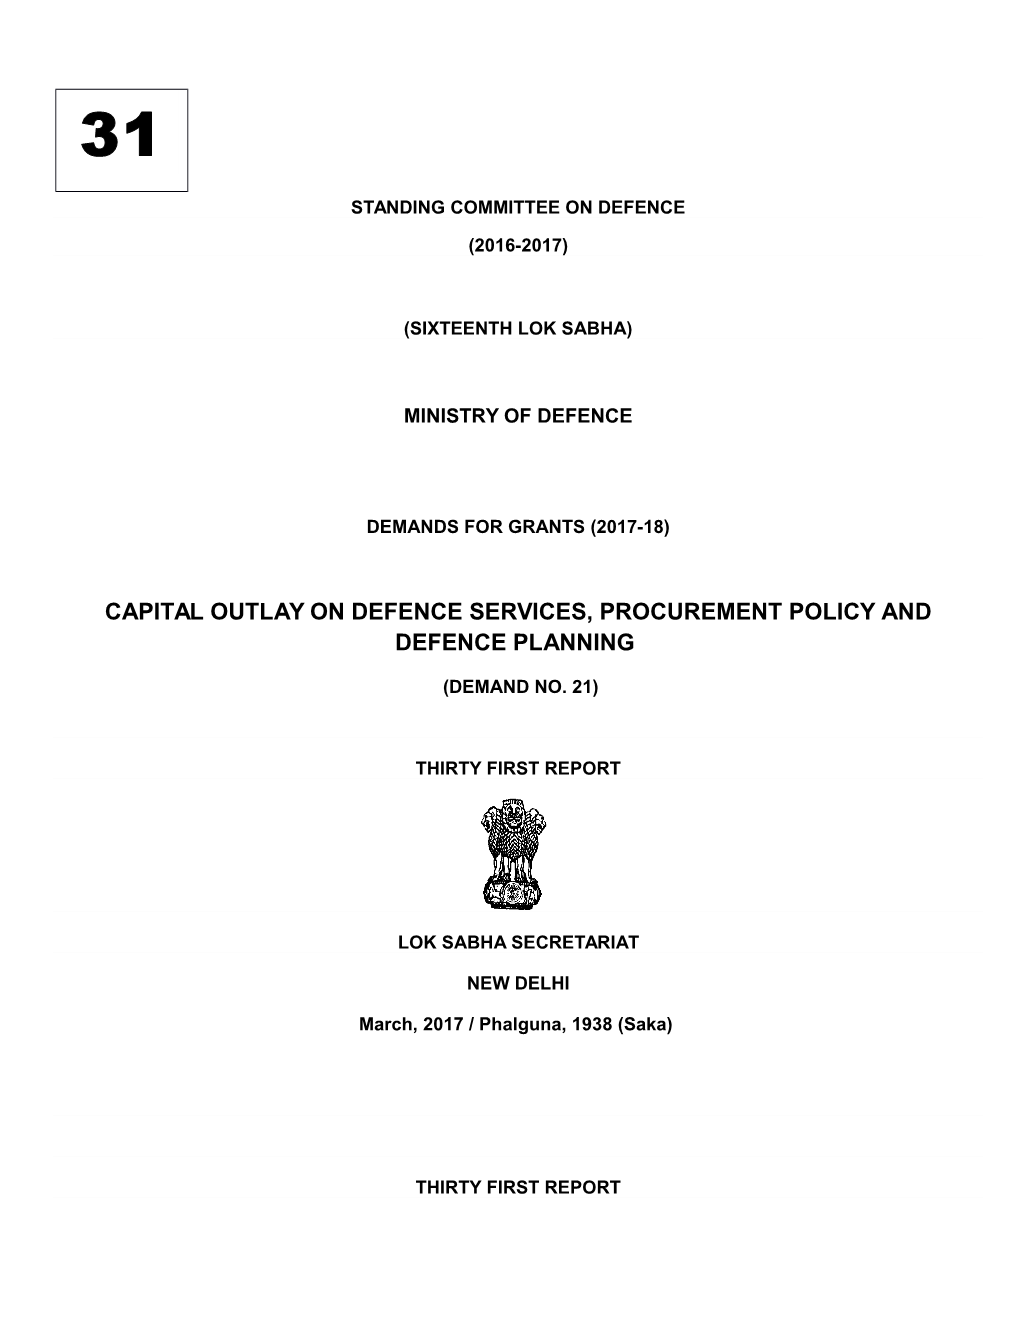 Capital Outlay on Defence Services, Procurement Policy and Defence Planning